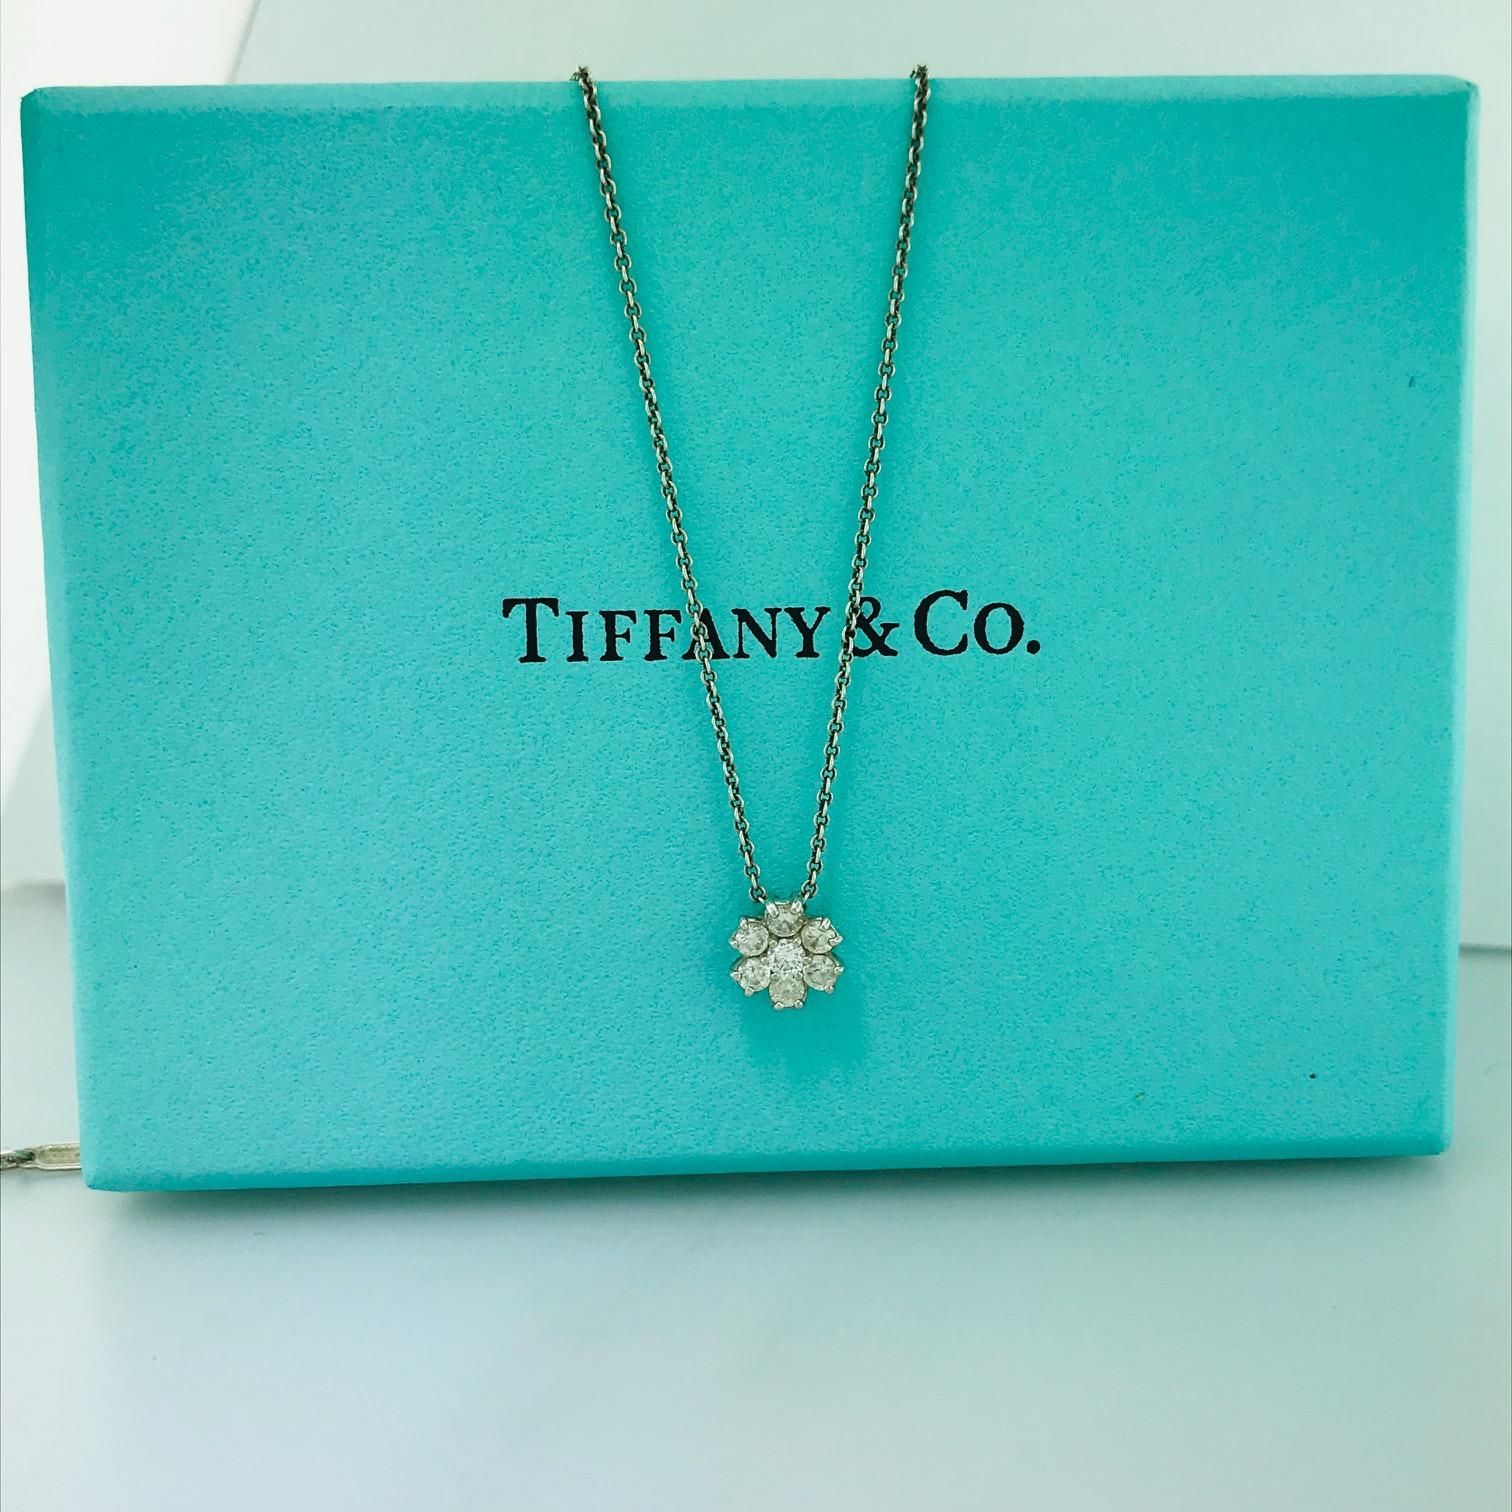 Artisan Tiffany & Co. Original 0.30 Carat Diamond Cluster Necklace in Sterling Silver